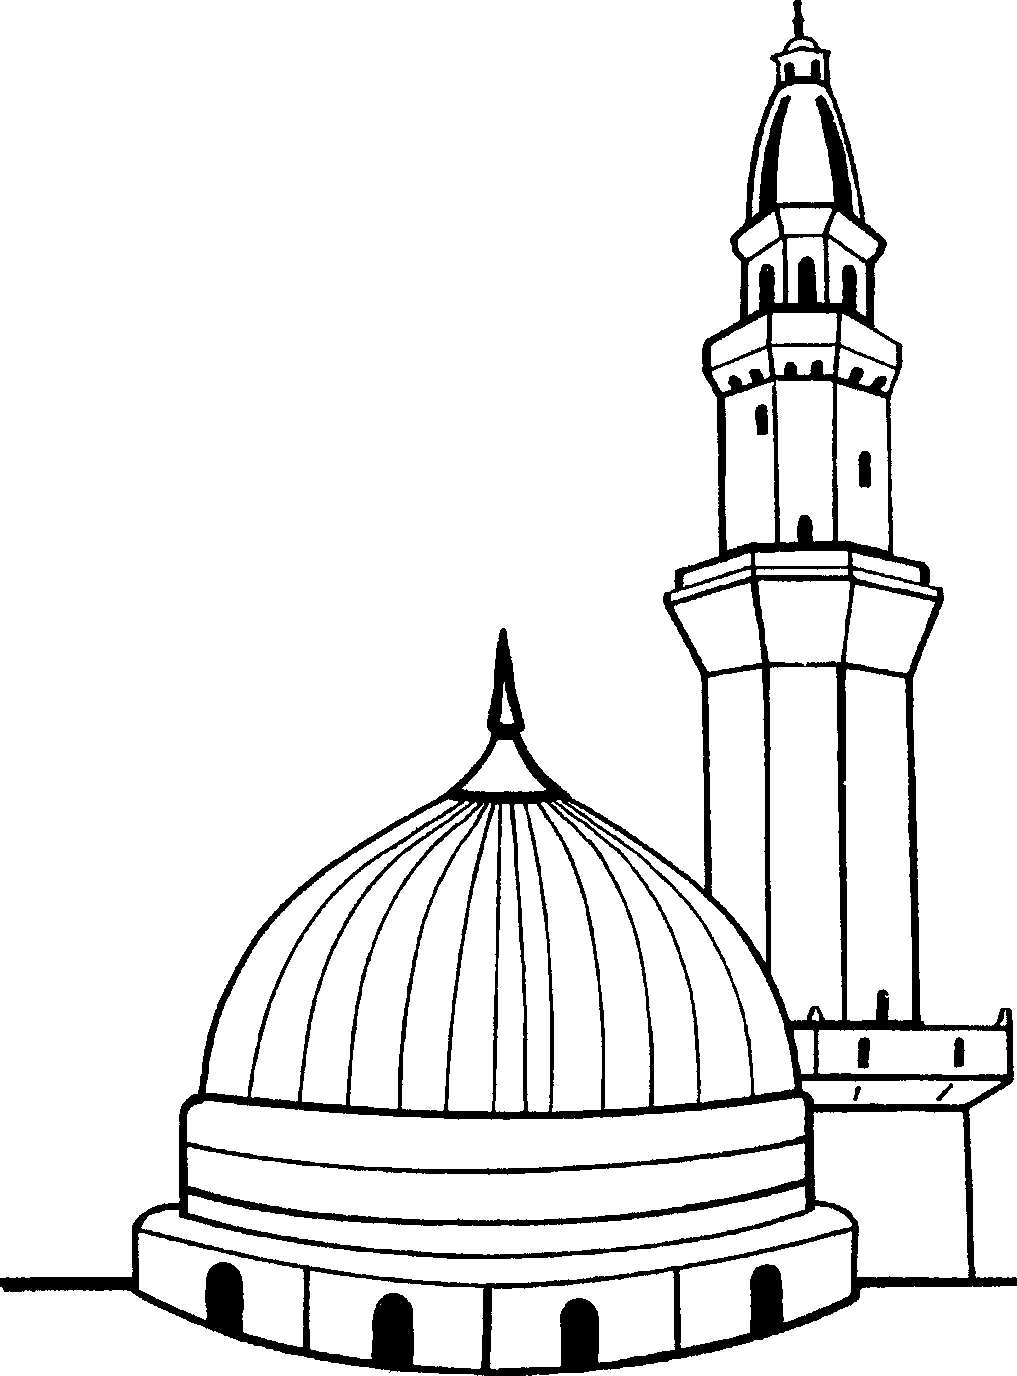 Masjid Nabawi Coloring Pages